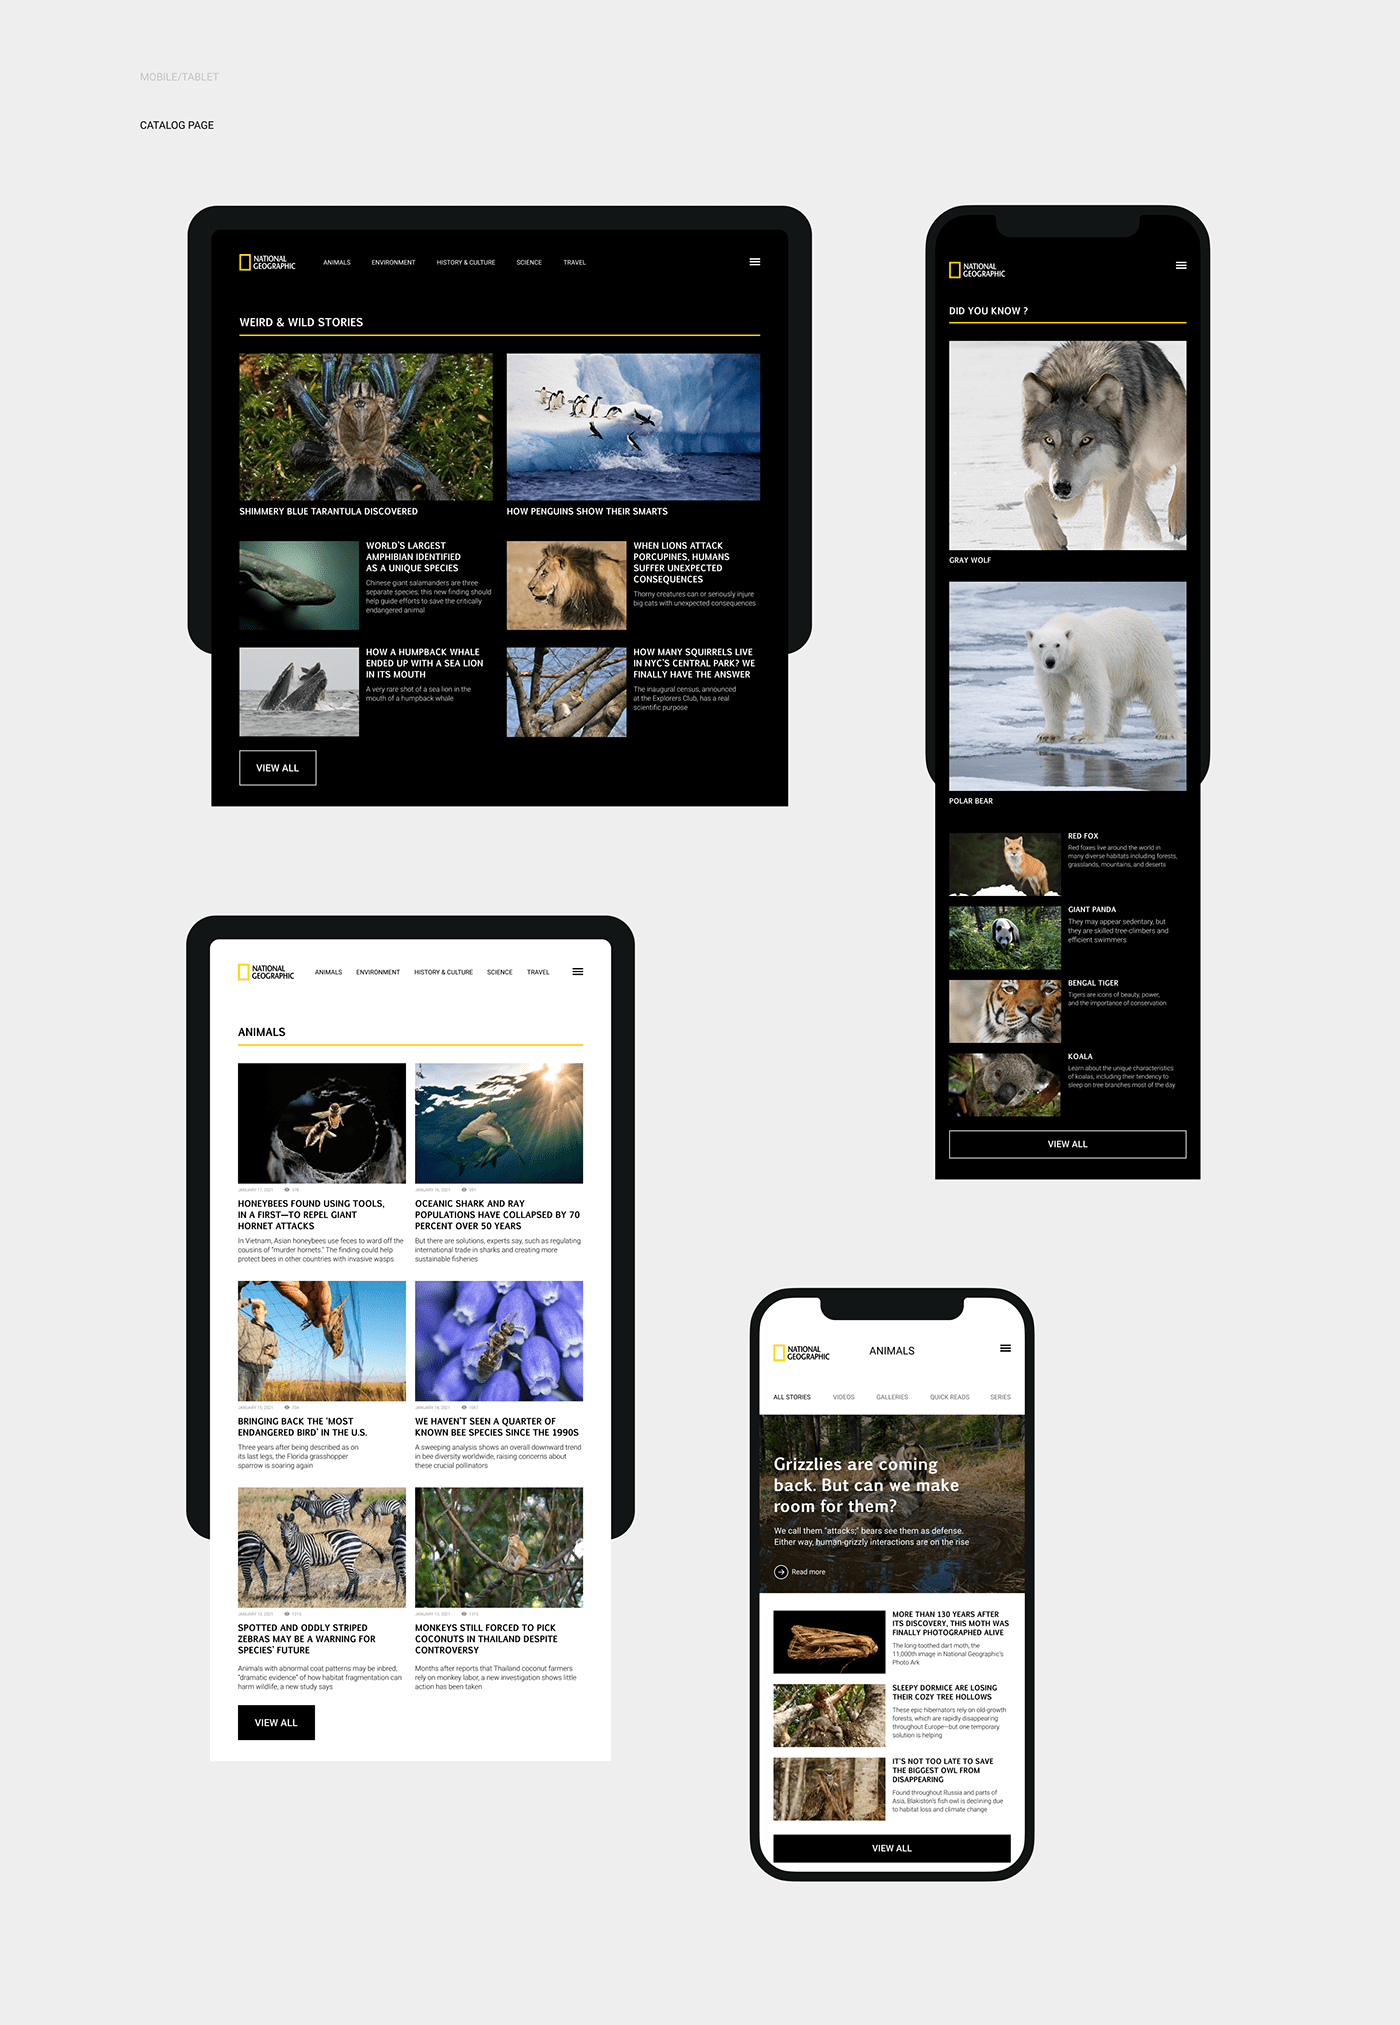 national geographic redesign